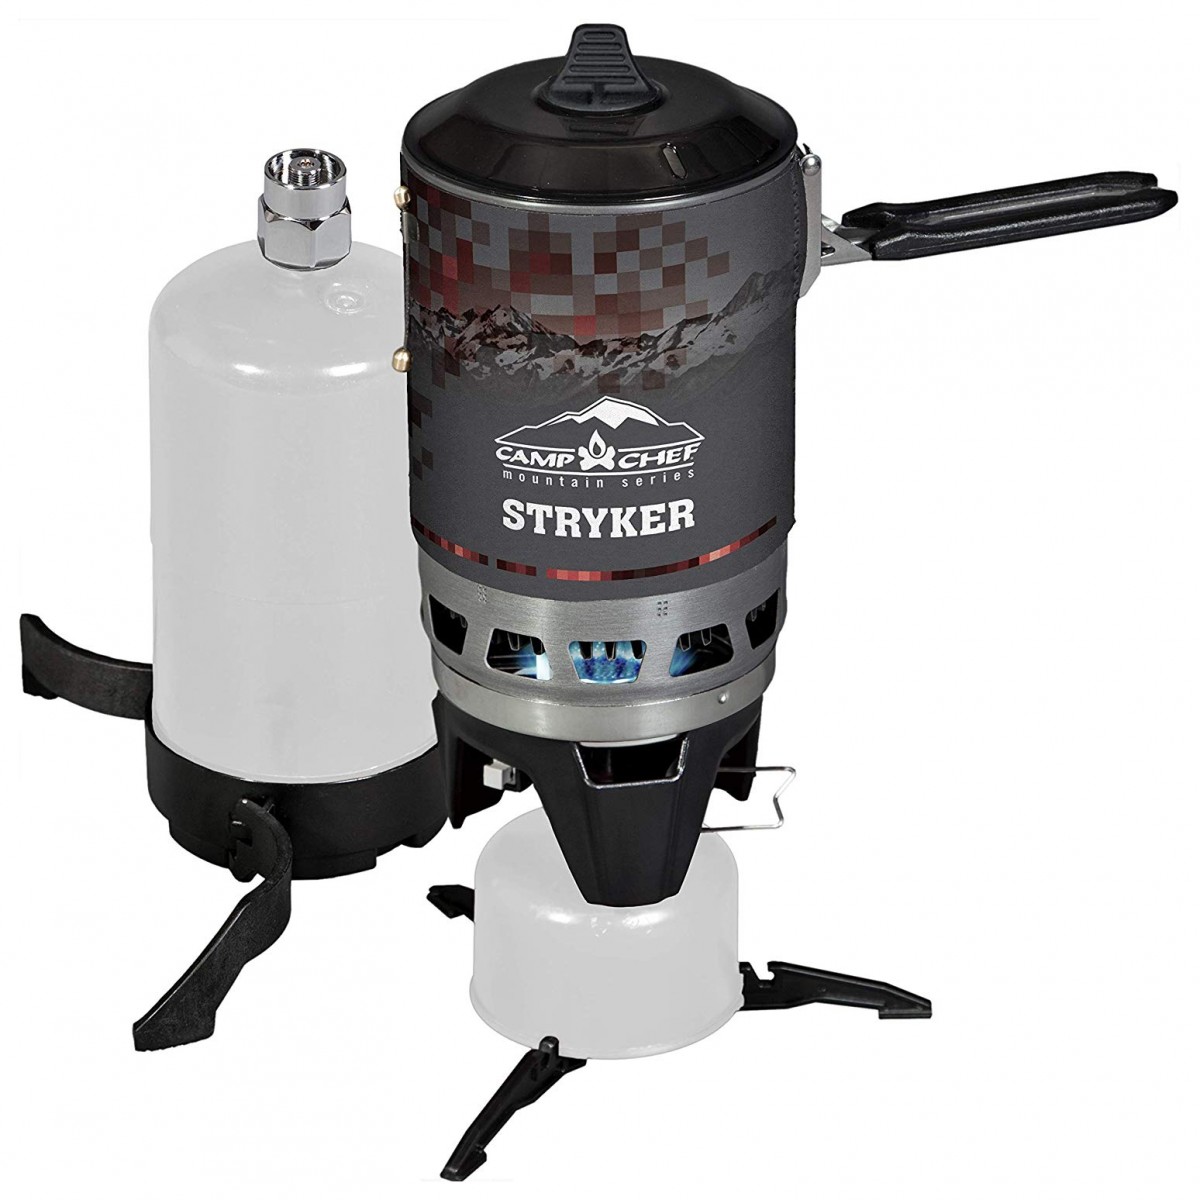 camp chef stryker multi-fuel backpacking stove review